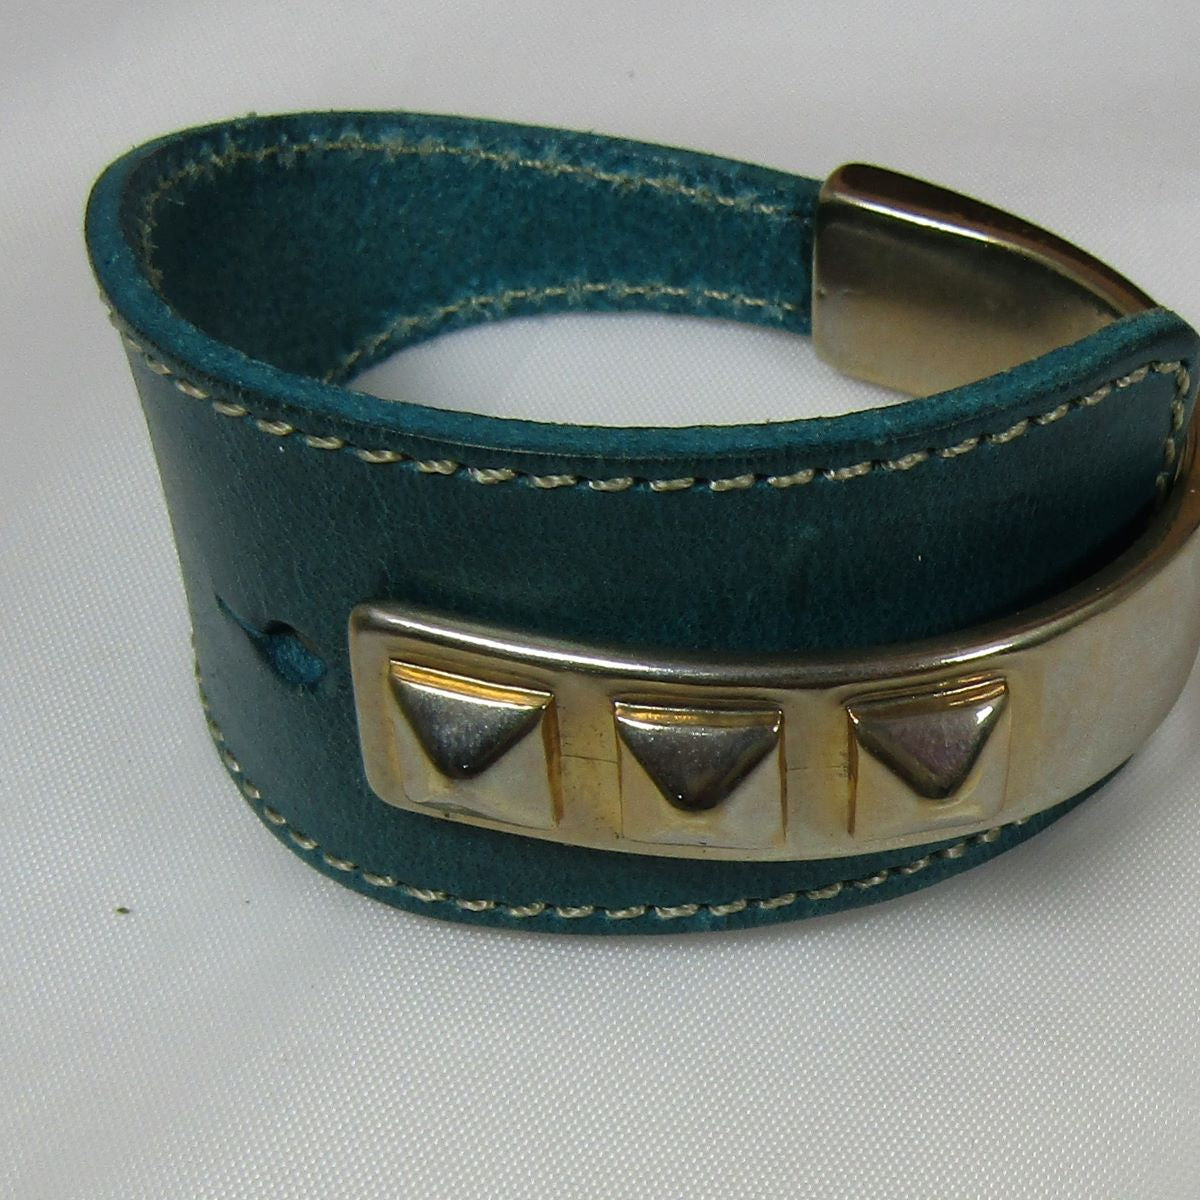 Cuff Leather Bracelet with Gold Accents - VP's Jewelry